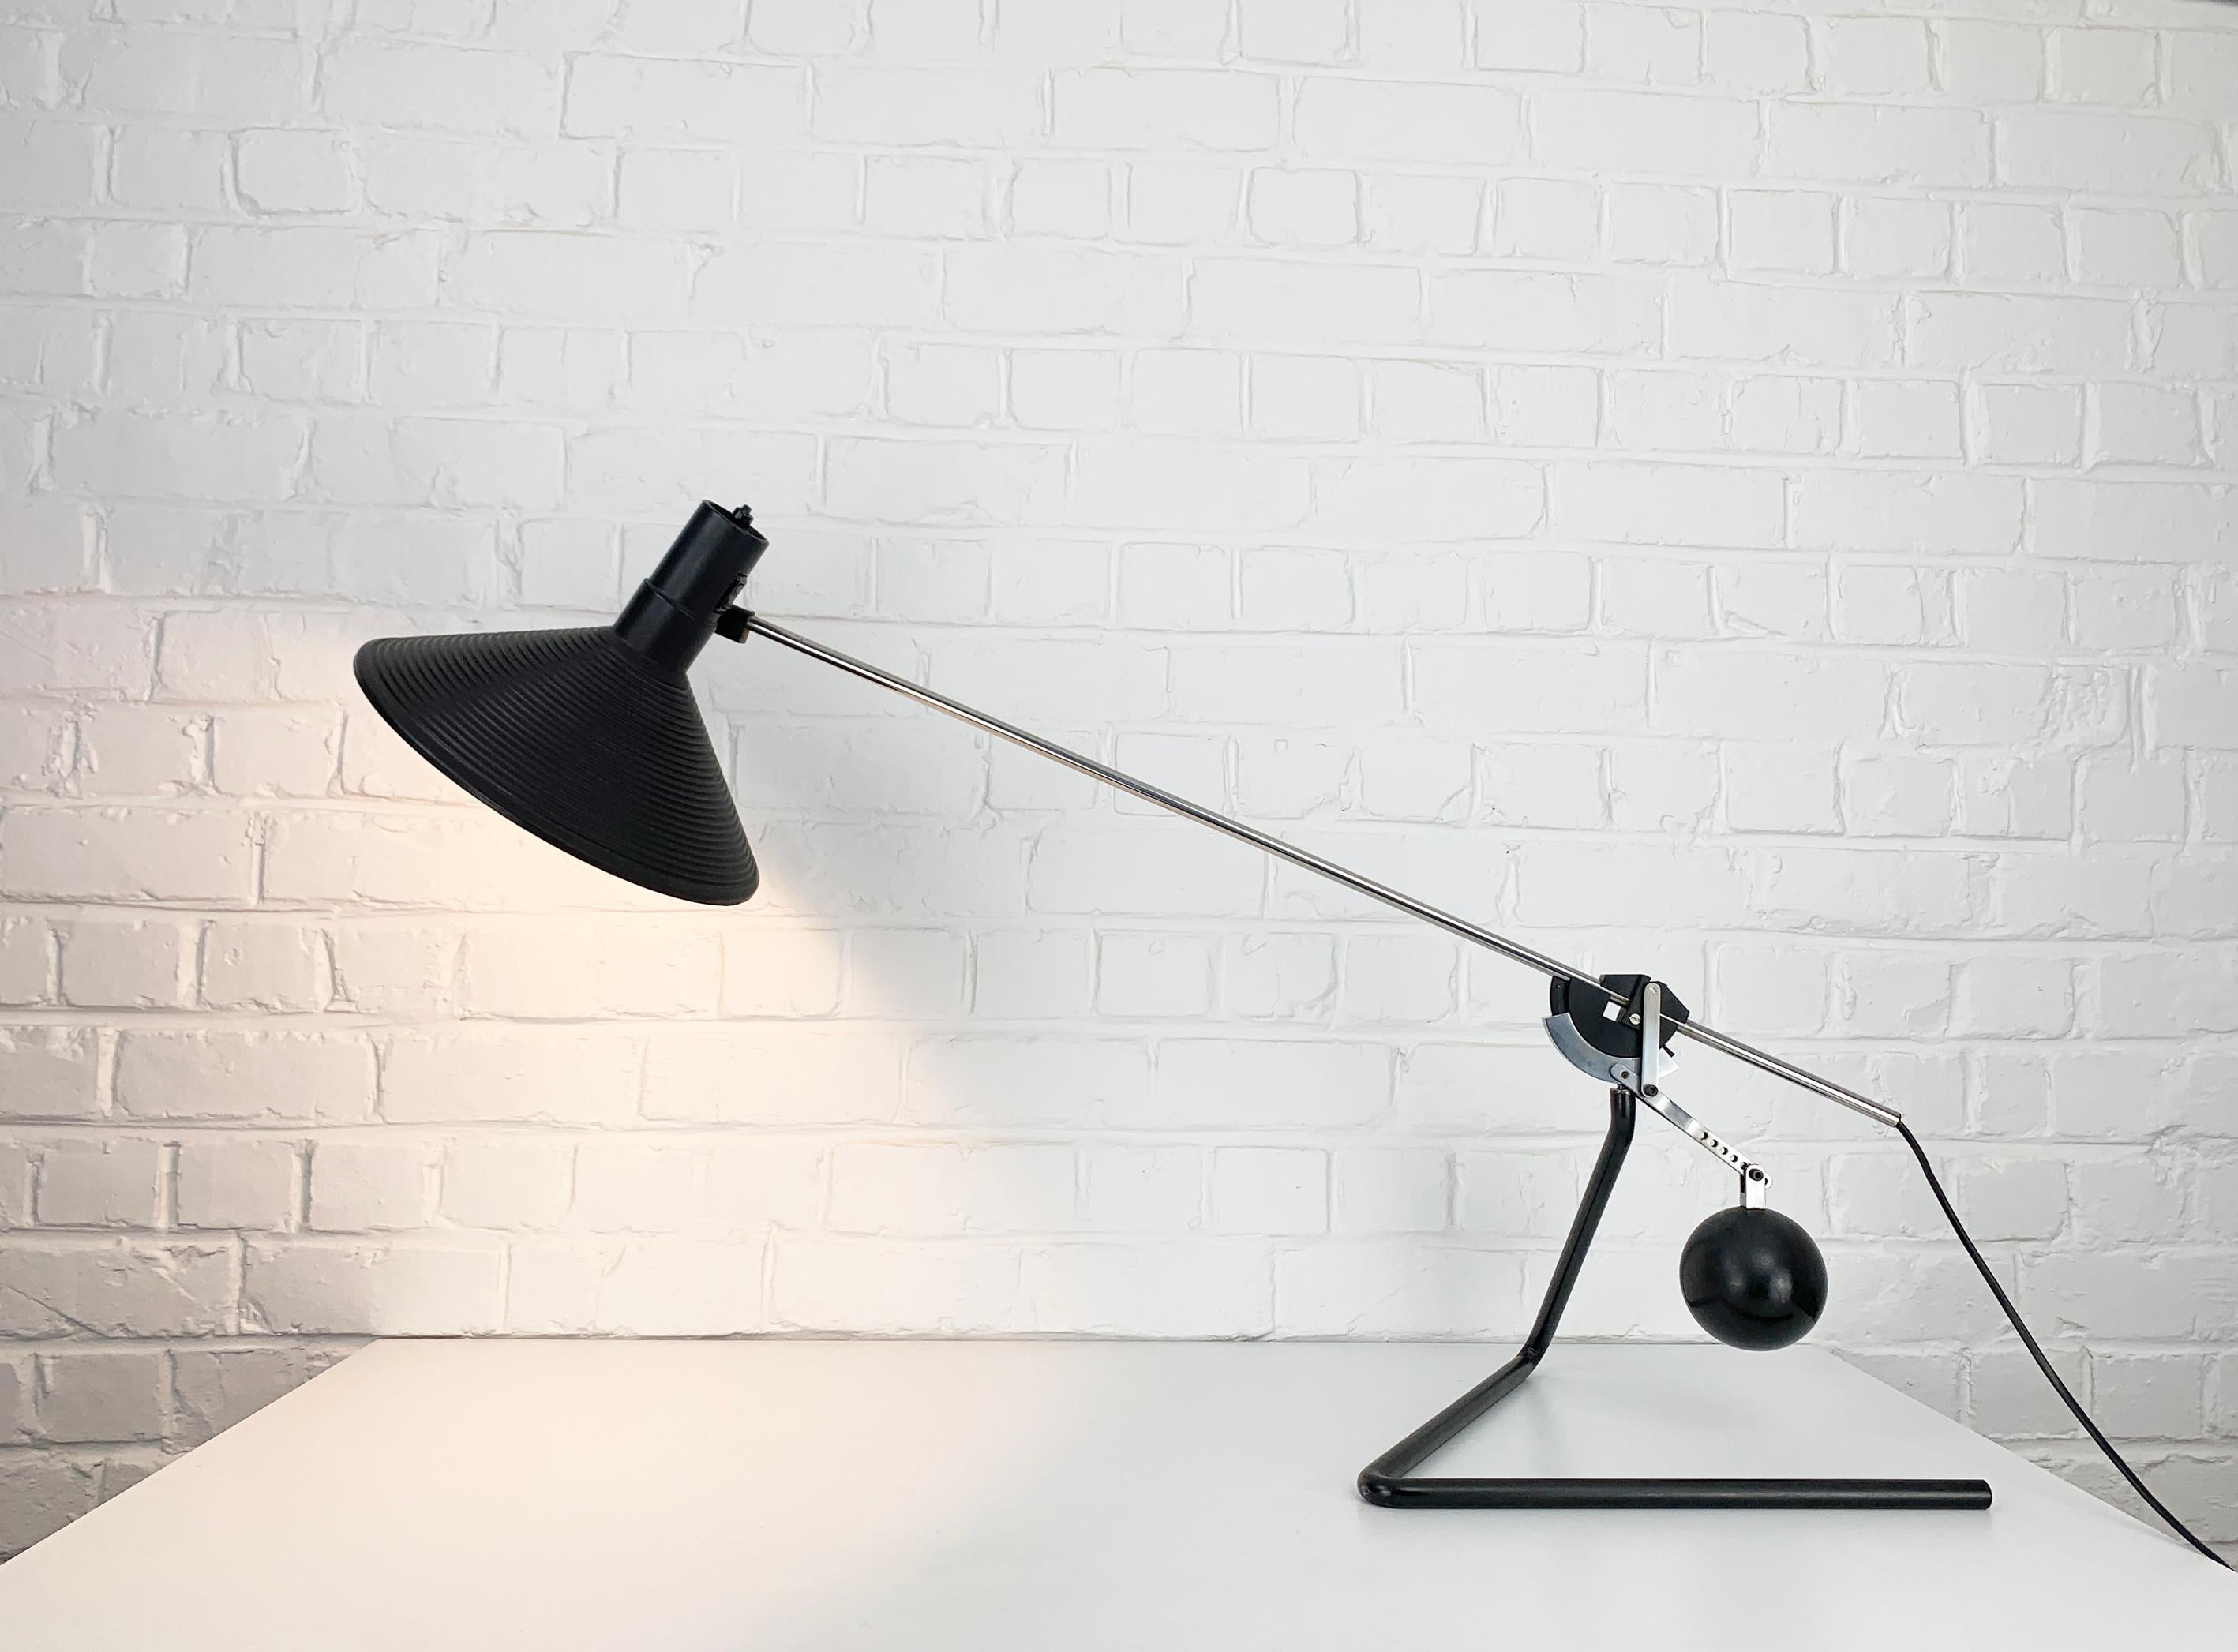 Ingenious desk lamp with a counterweight mechanism which allows the lamp to be stable in every position. The spheric counterweight is solid steel and heavy enough to point or position the lamp as desired. 

A throughout solid construction which